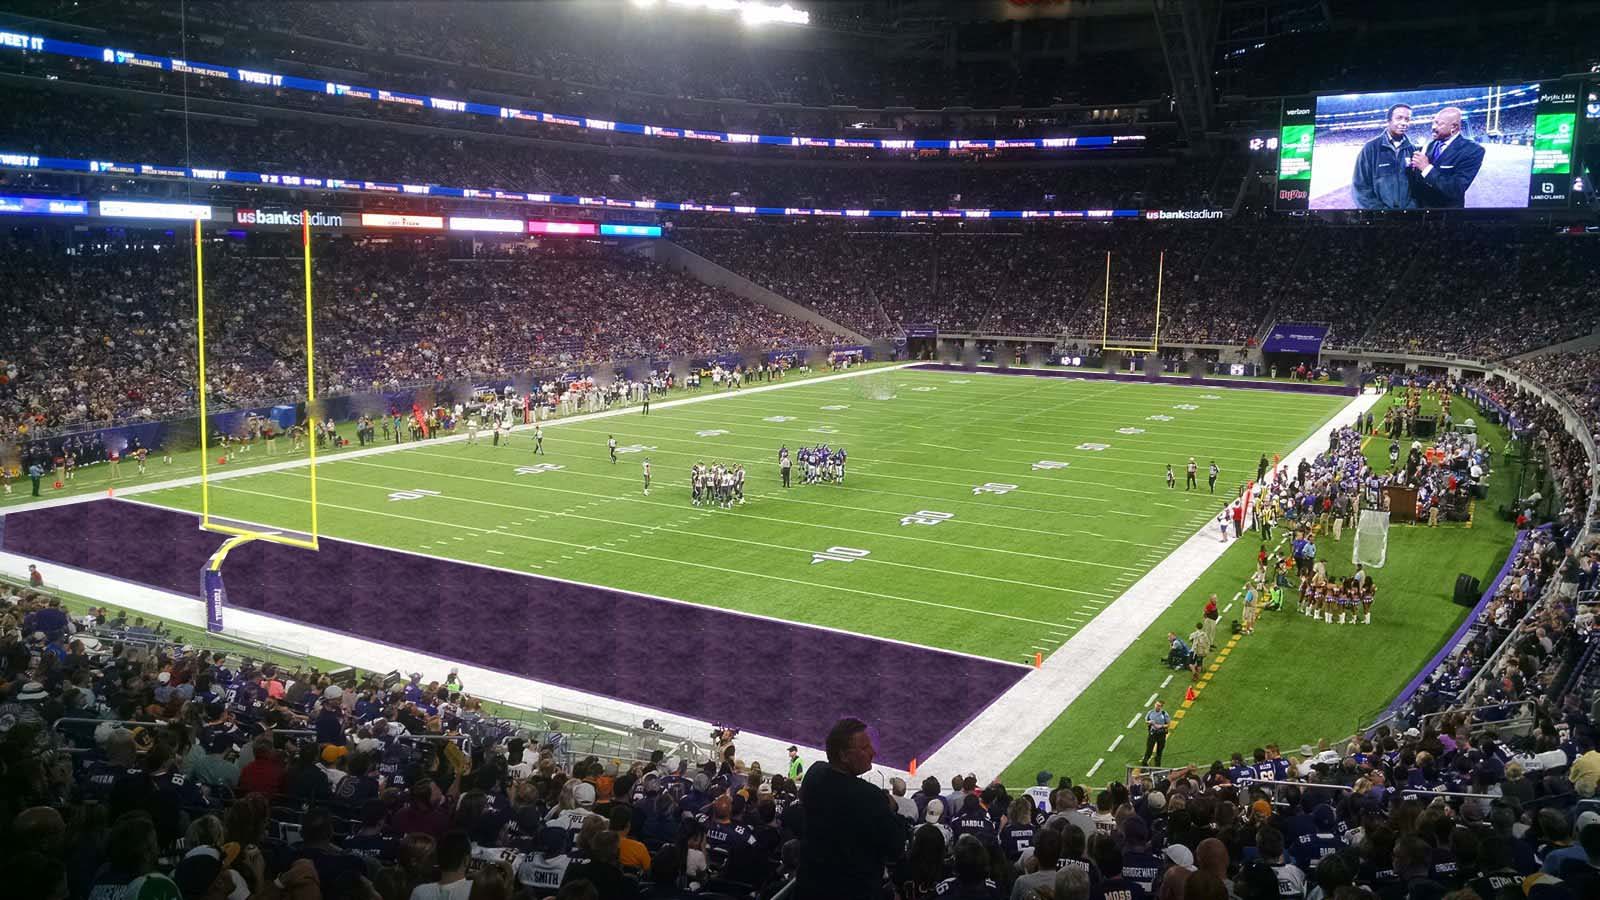 section 138, row 27 seat view  for football - u.s. bank stadium